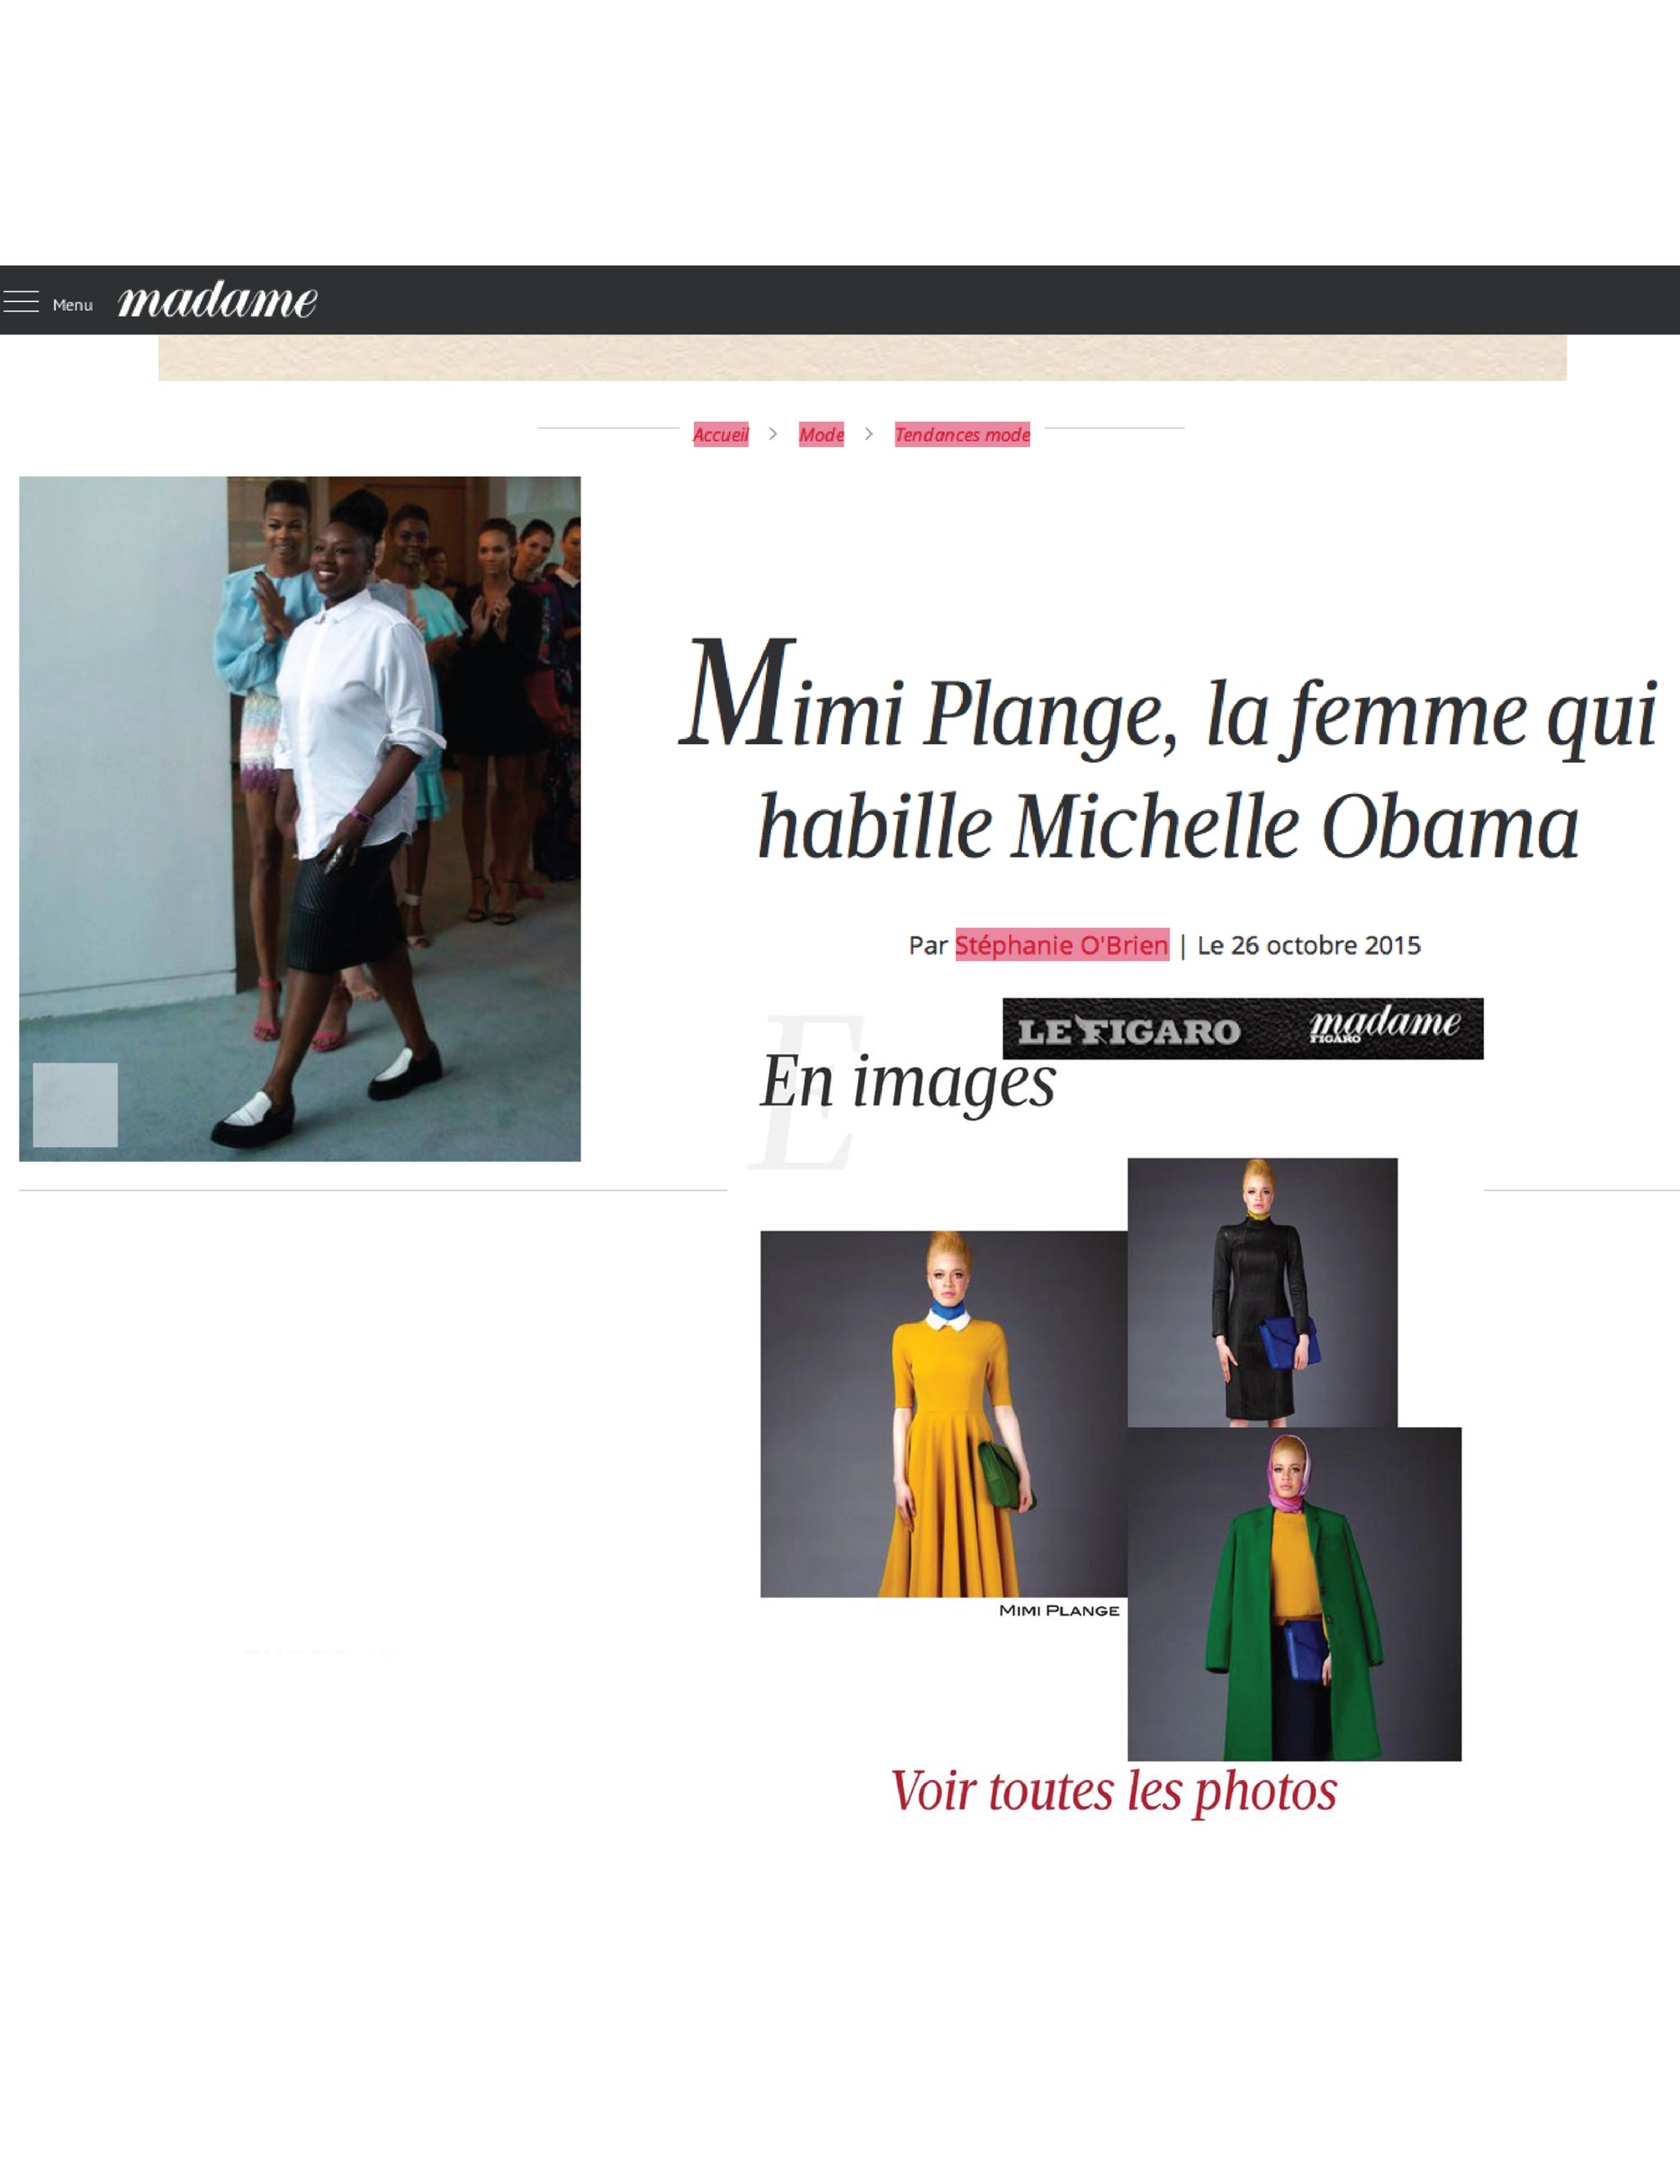 Mimi Plange featured in Madame Figaro!